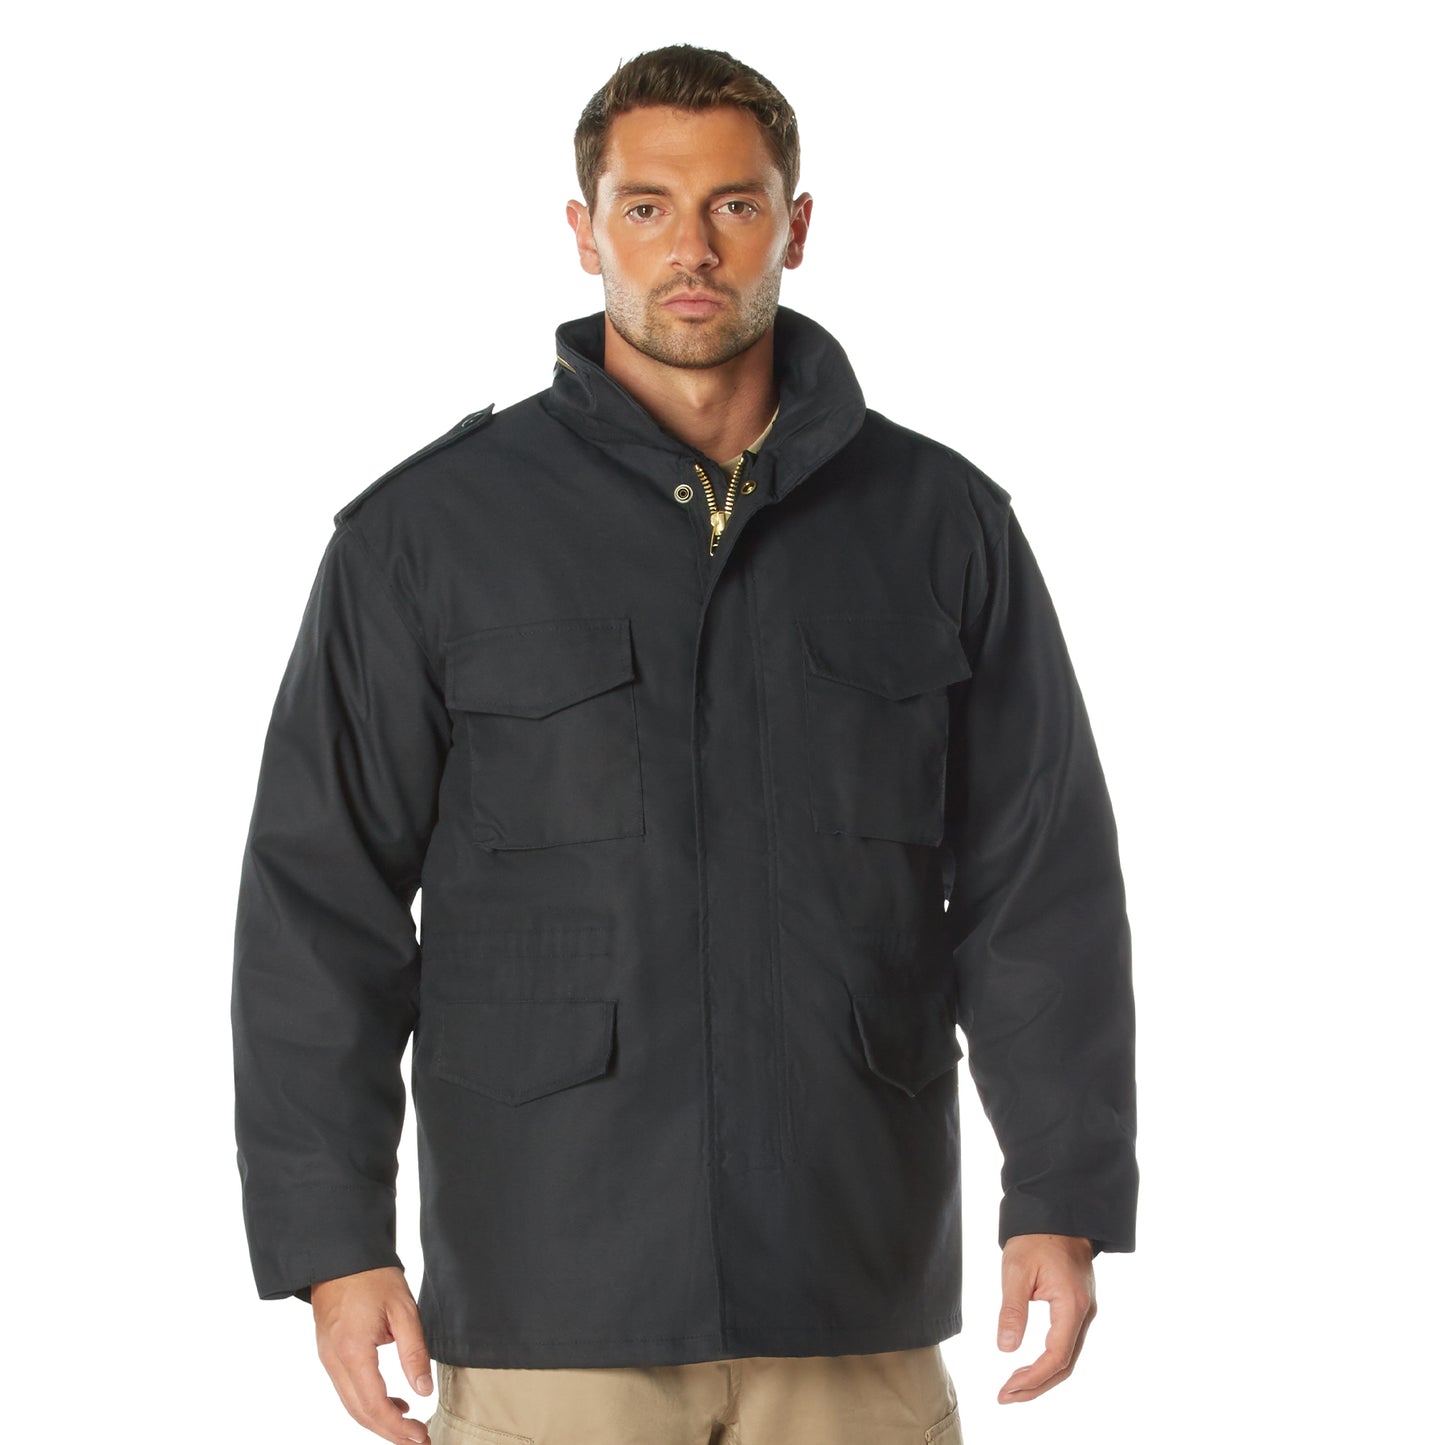 Rothco M-65 Field Jacket With Liner - Black